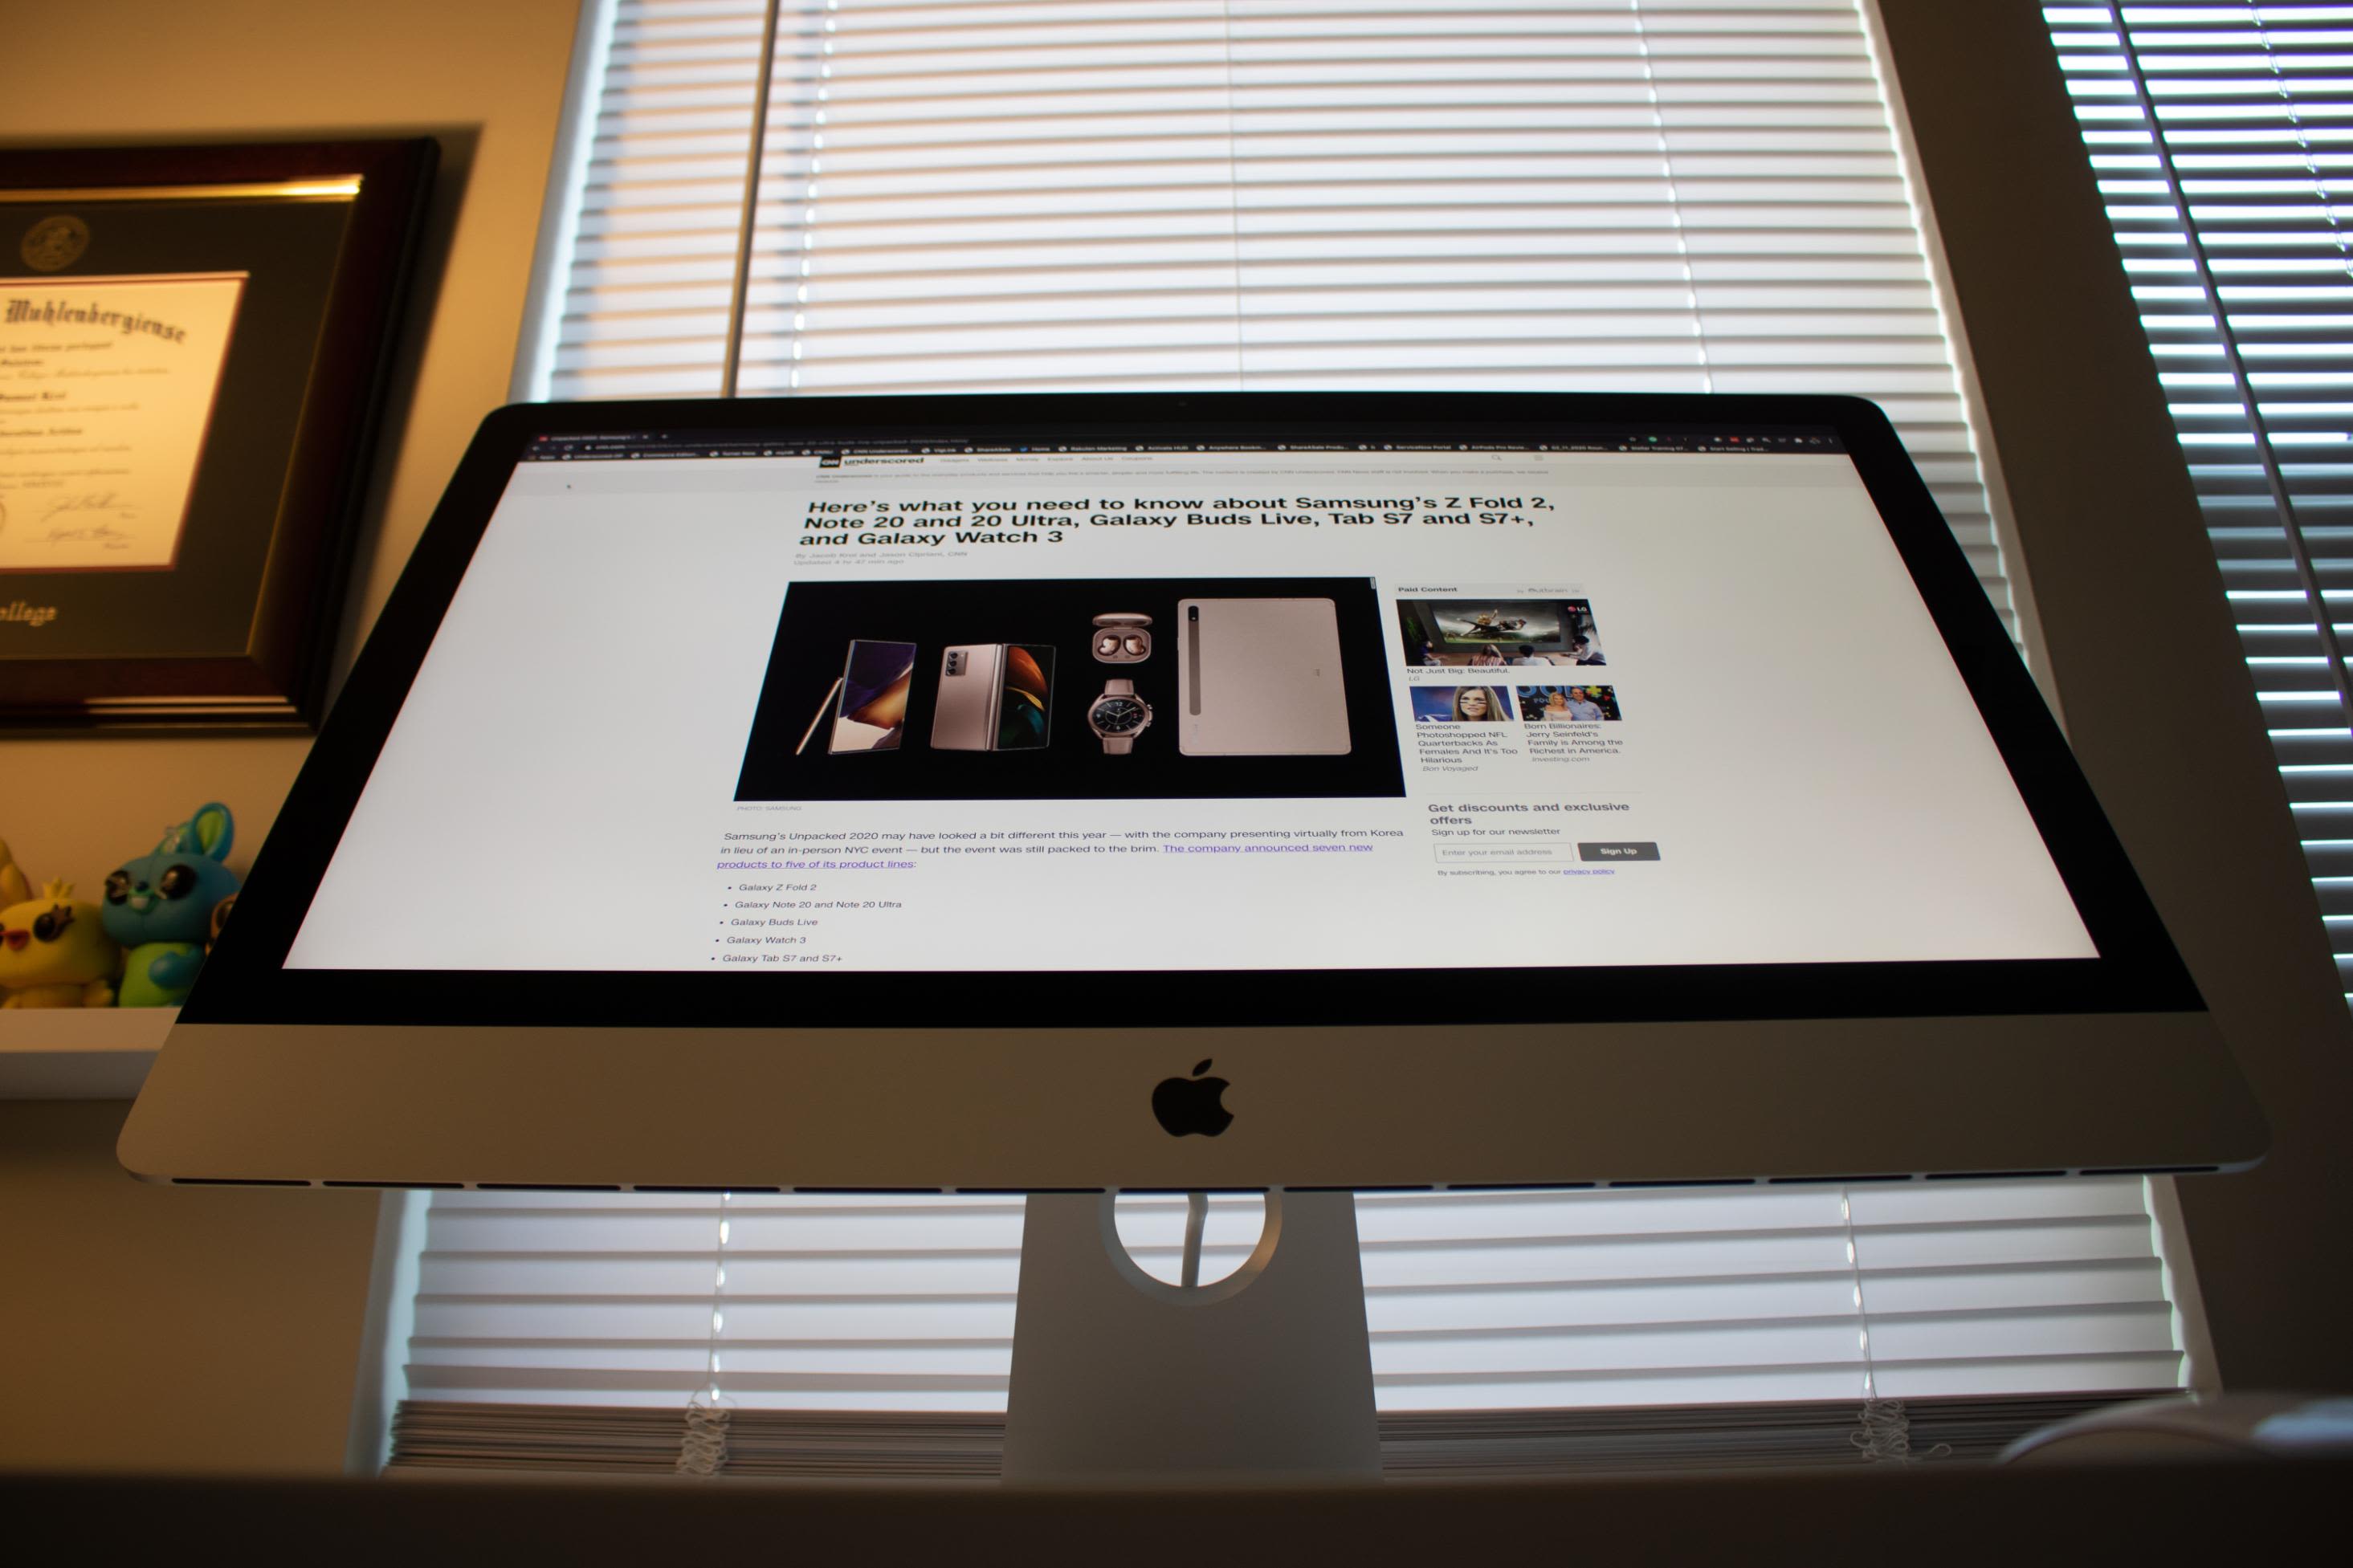 Apple iMac 27-Inch (2020) Review